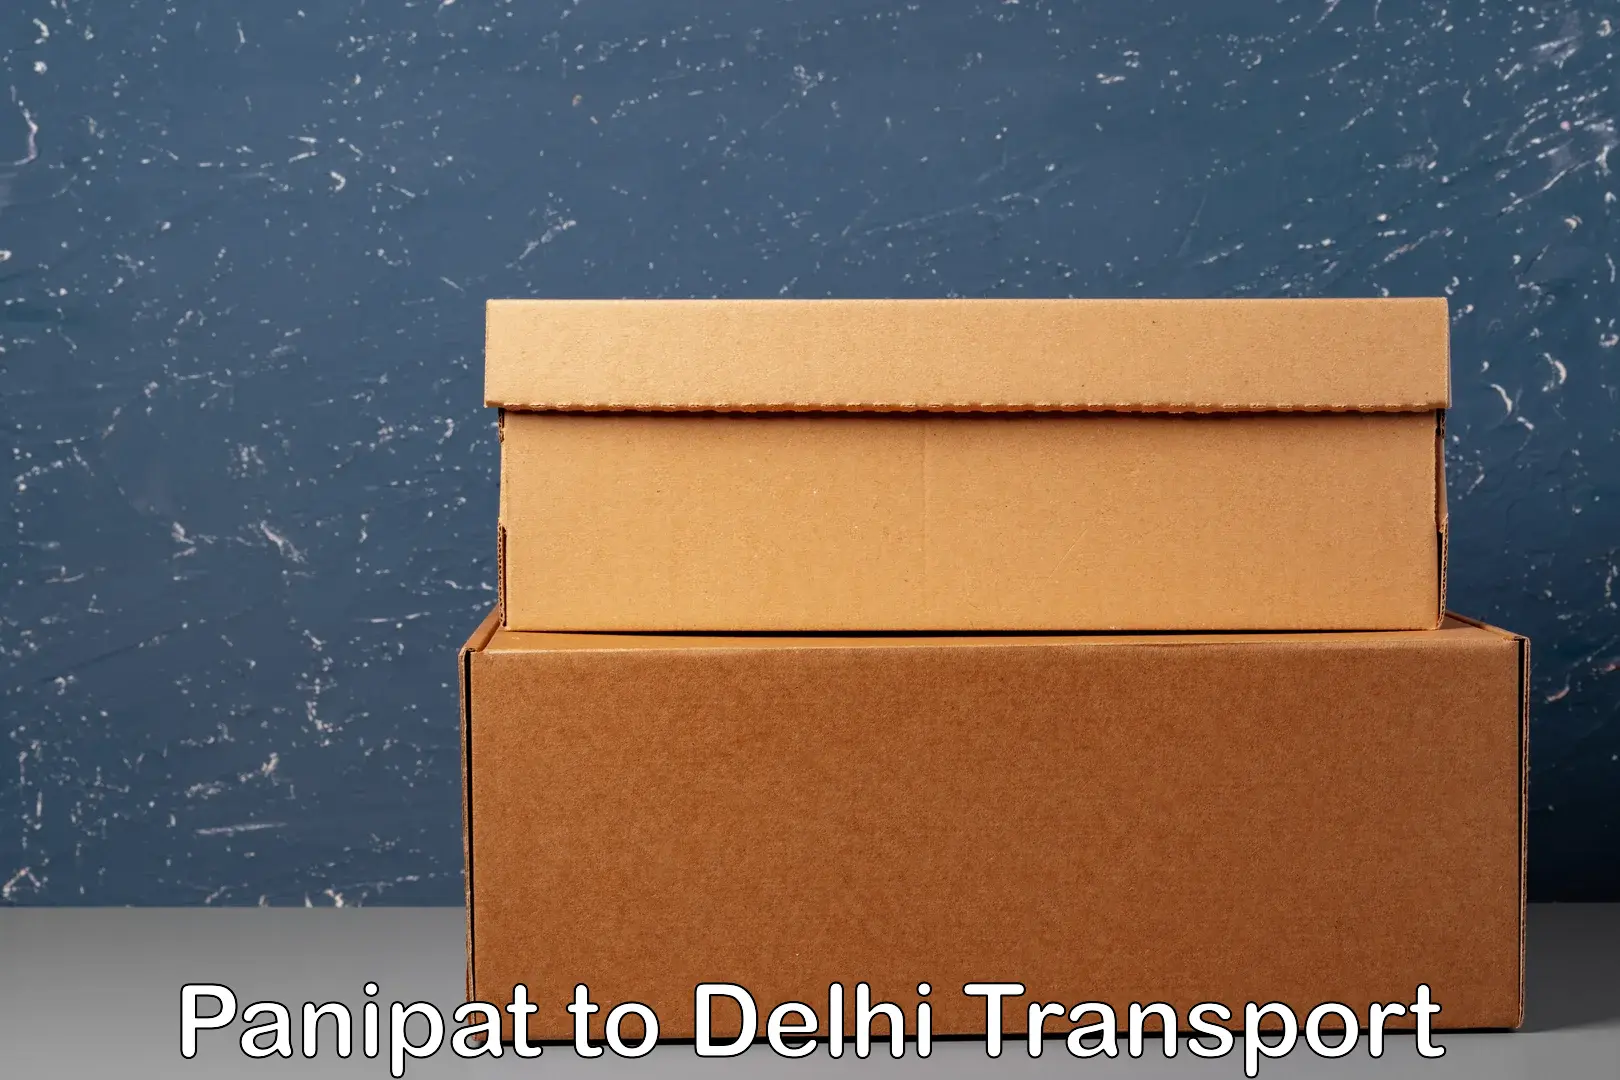 Commercial transport service Panipat to Delhi